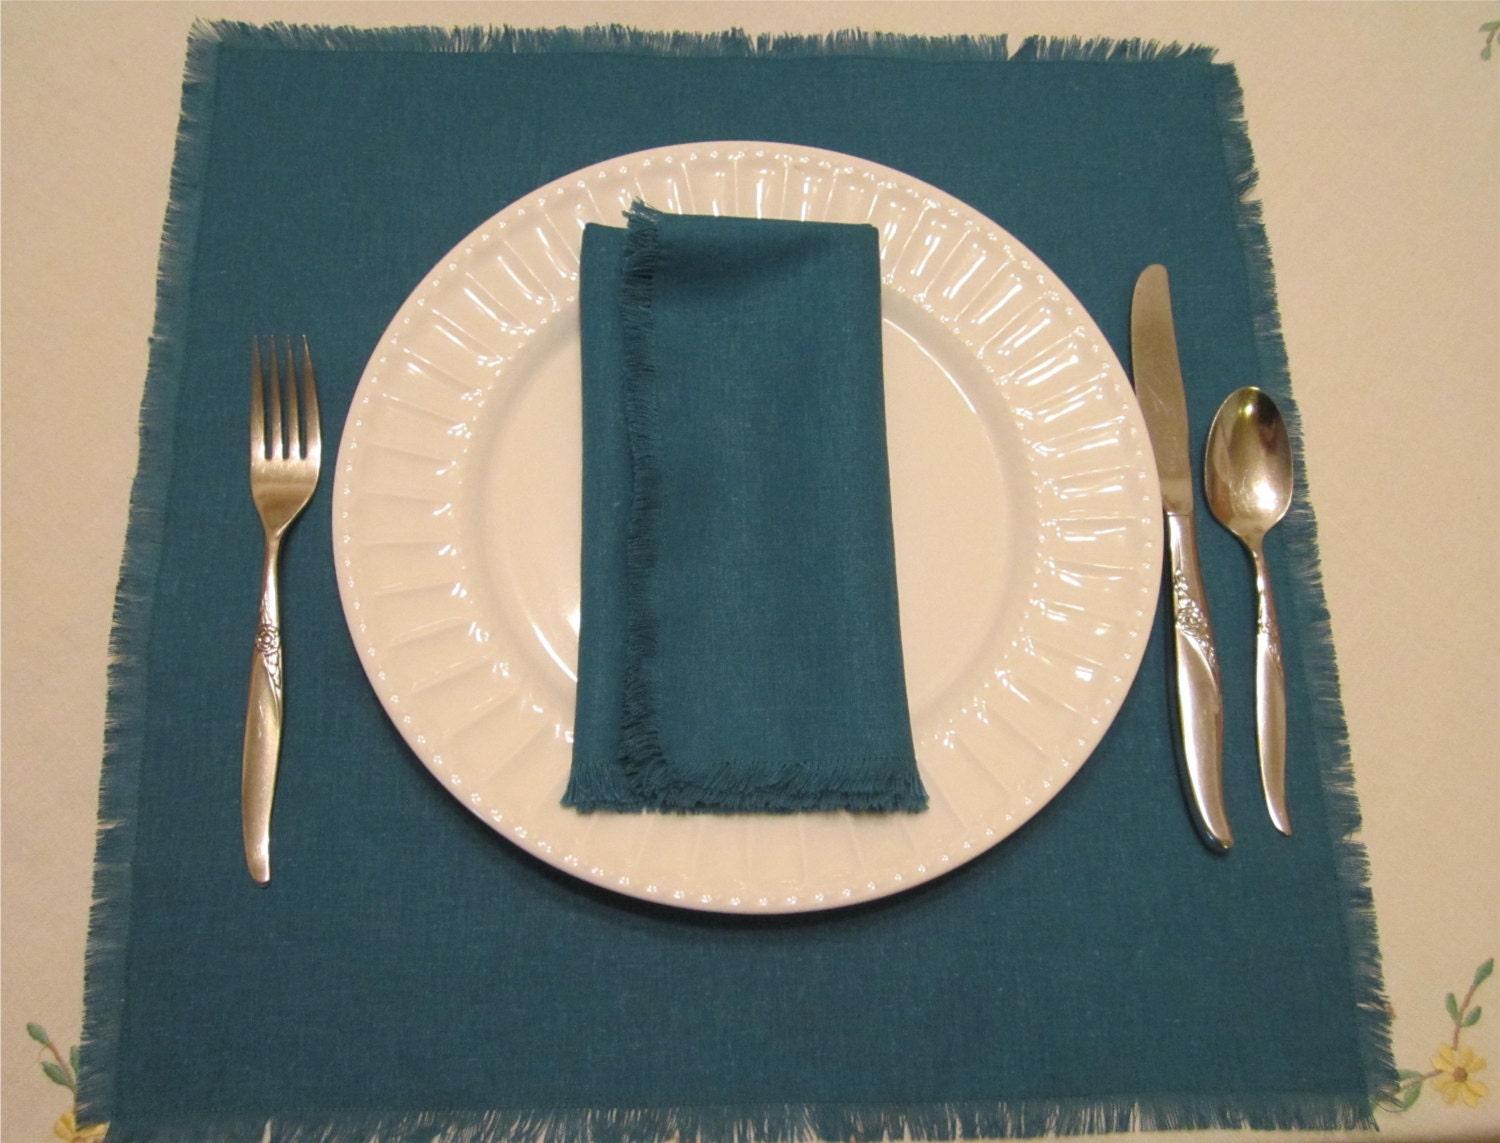 Linen Blend Fabric Napkins/Placemats Place Mats With Fringed Edges - Eco Friendly -True Teal Set Of 6